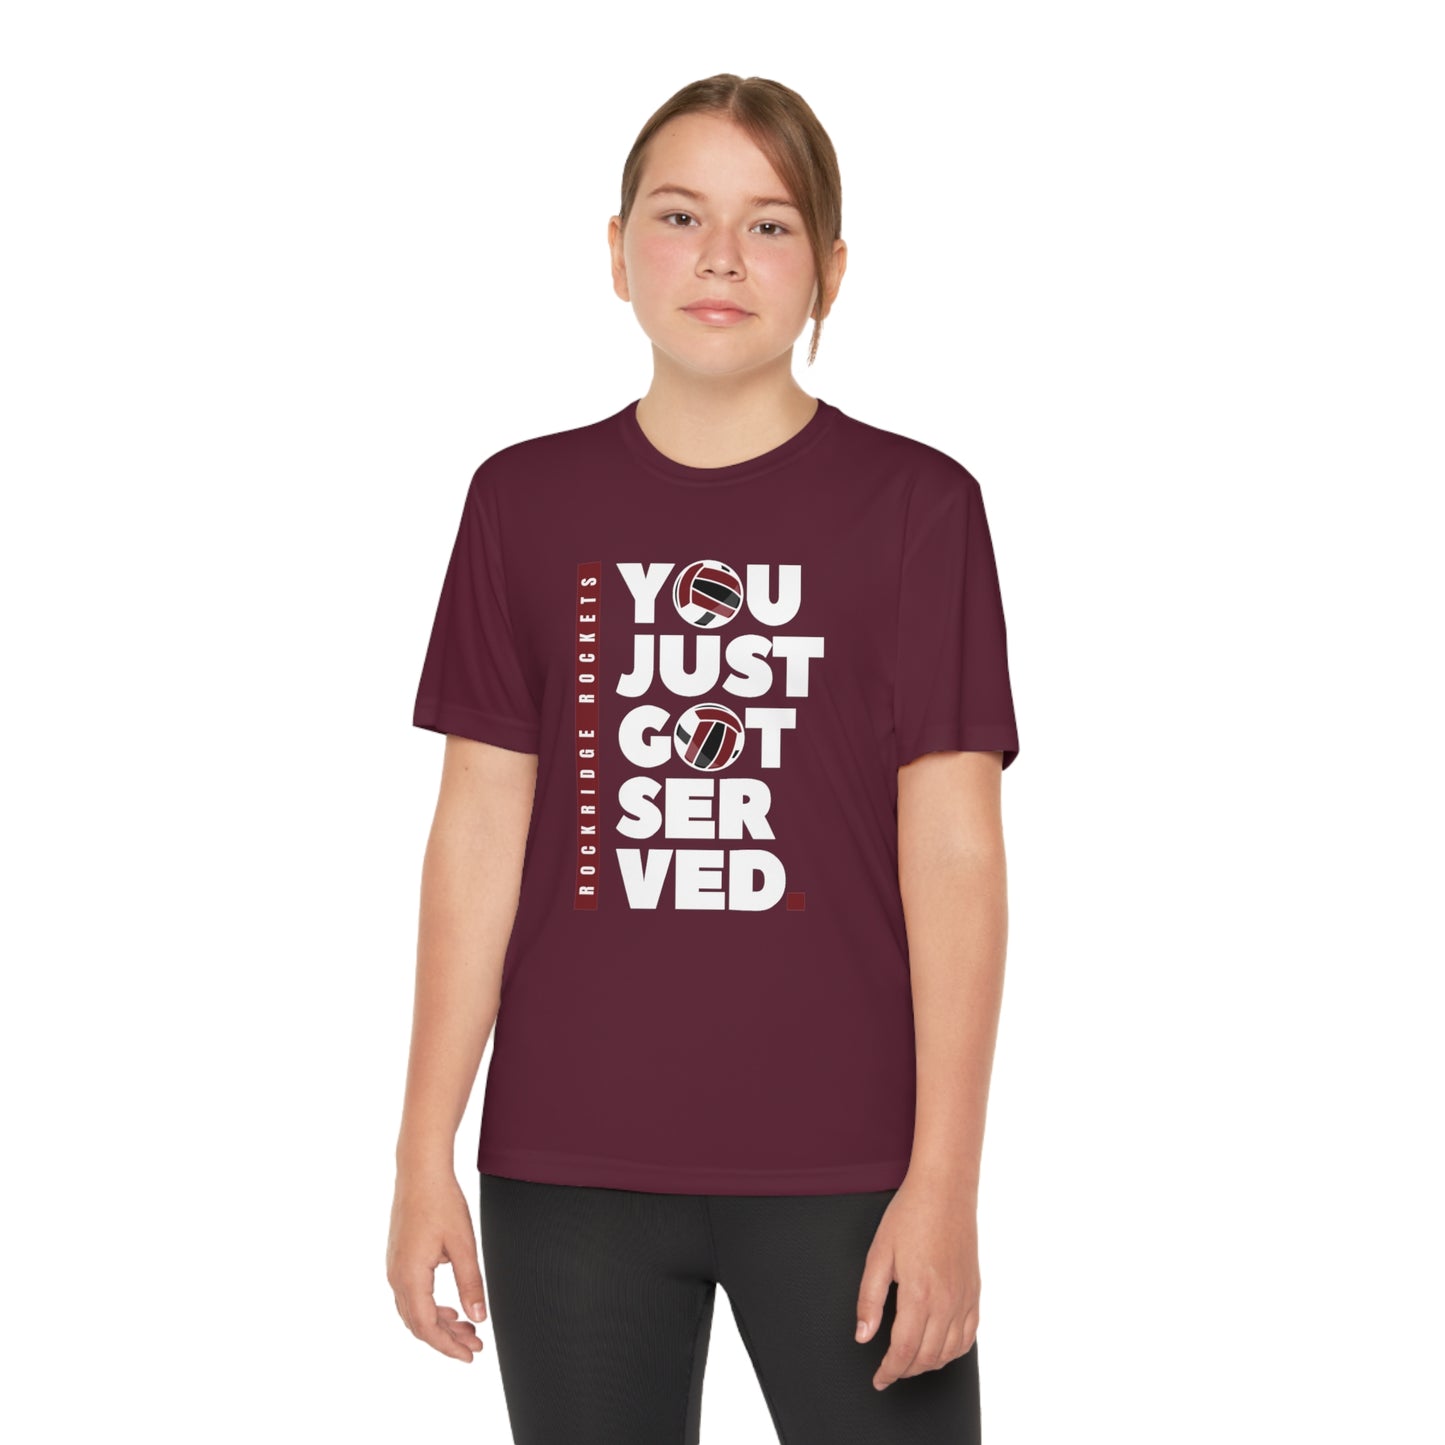 Volleyball, Rockridge Rockets - Youth Competitor Tee